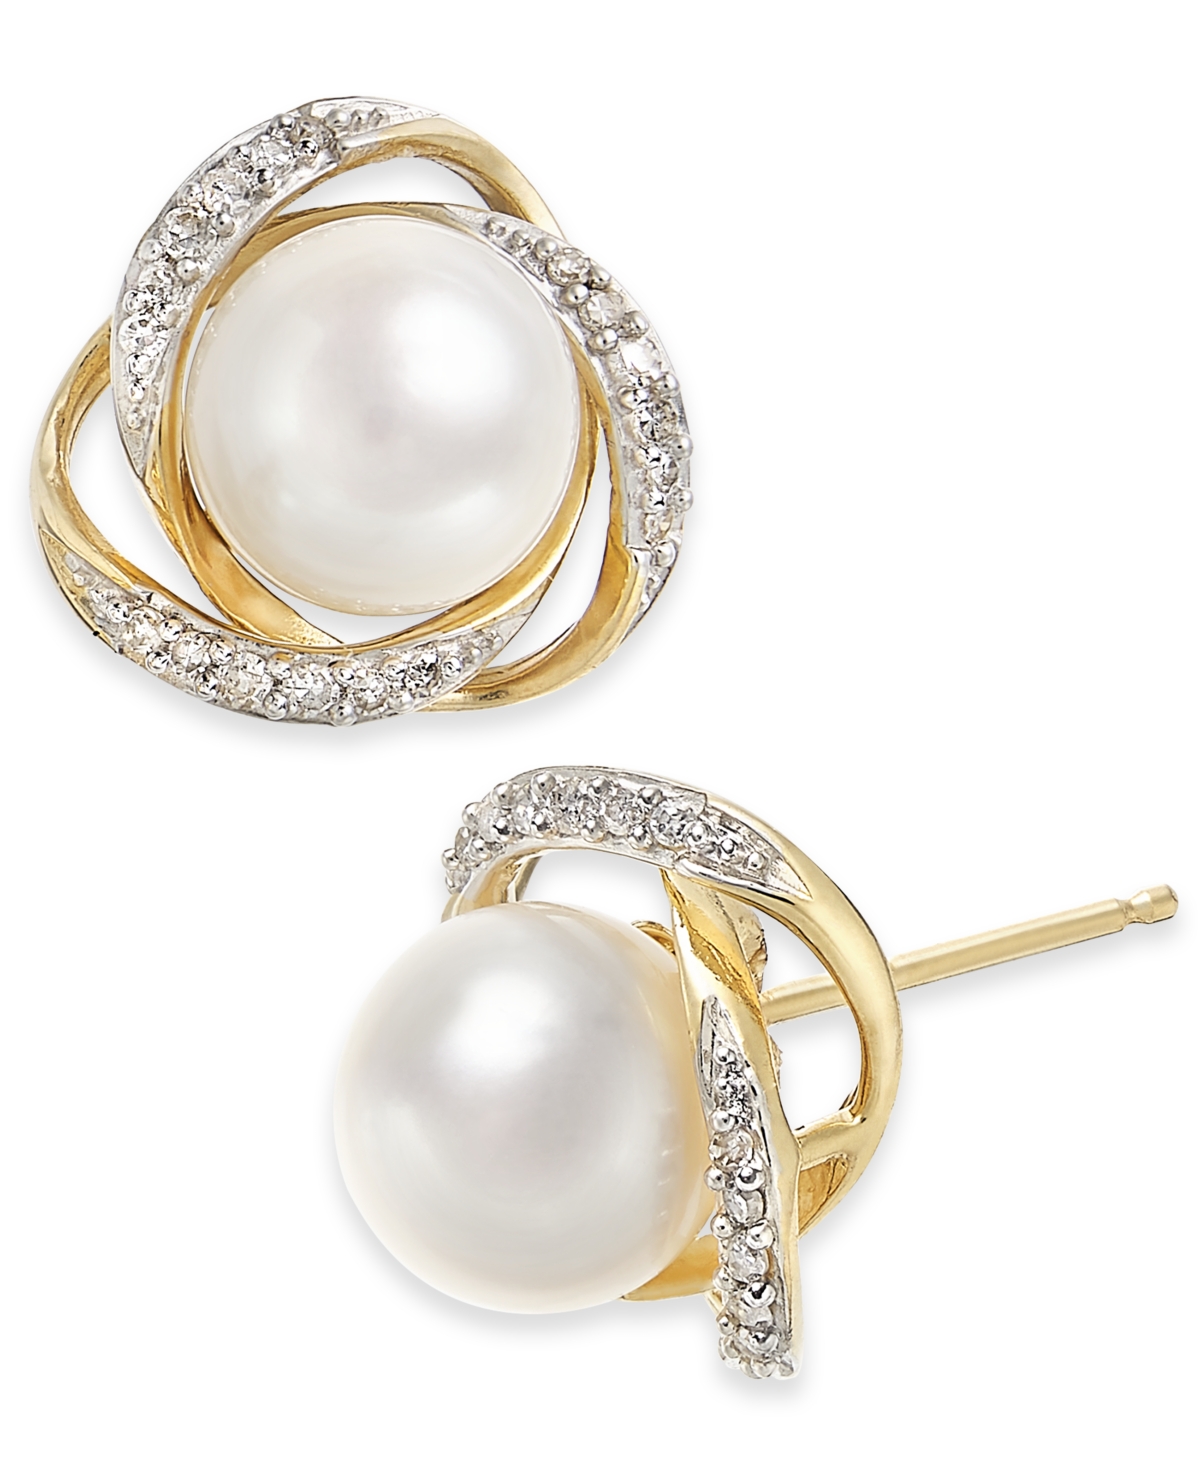 Cultured Freshwater Pearl (7mm) & Diamond (1/8 ct. t.w.) Stud Earrings in 14k Gold - White Gold